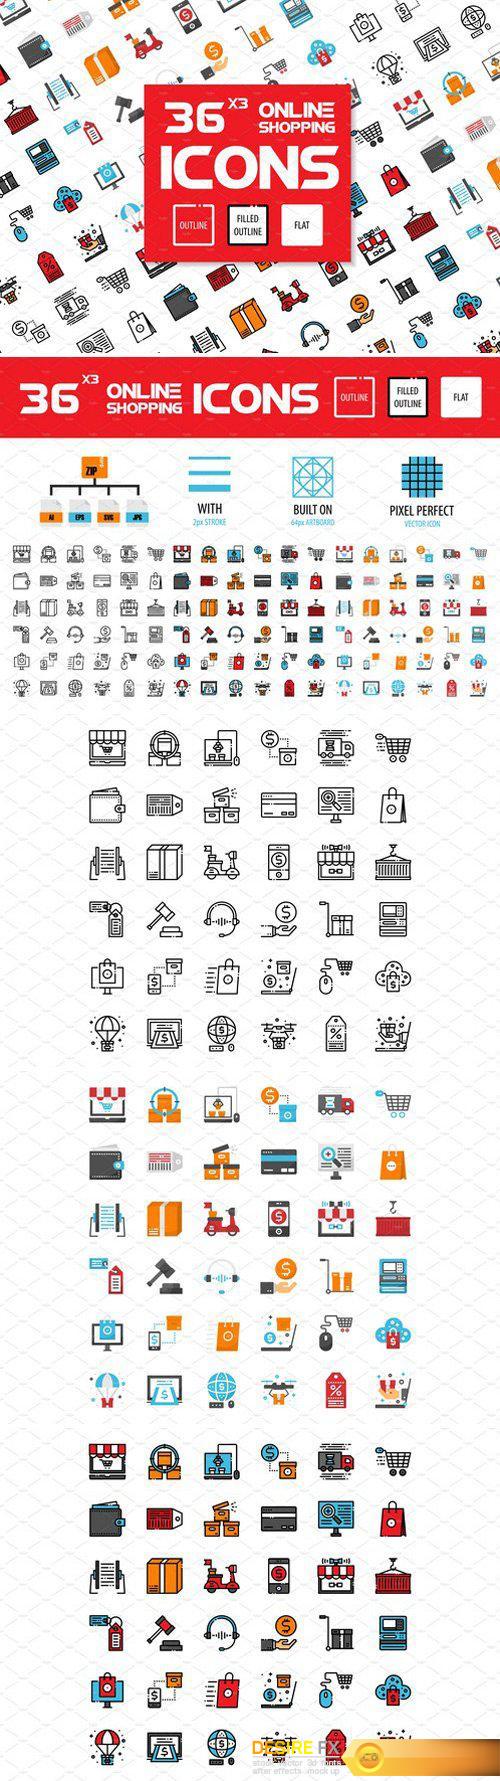 CM - 36x3 Online Shopping icons 2359988